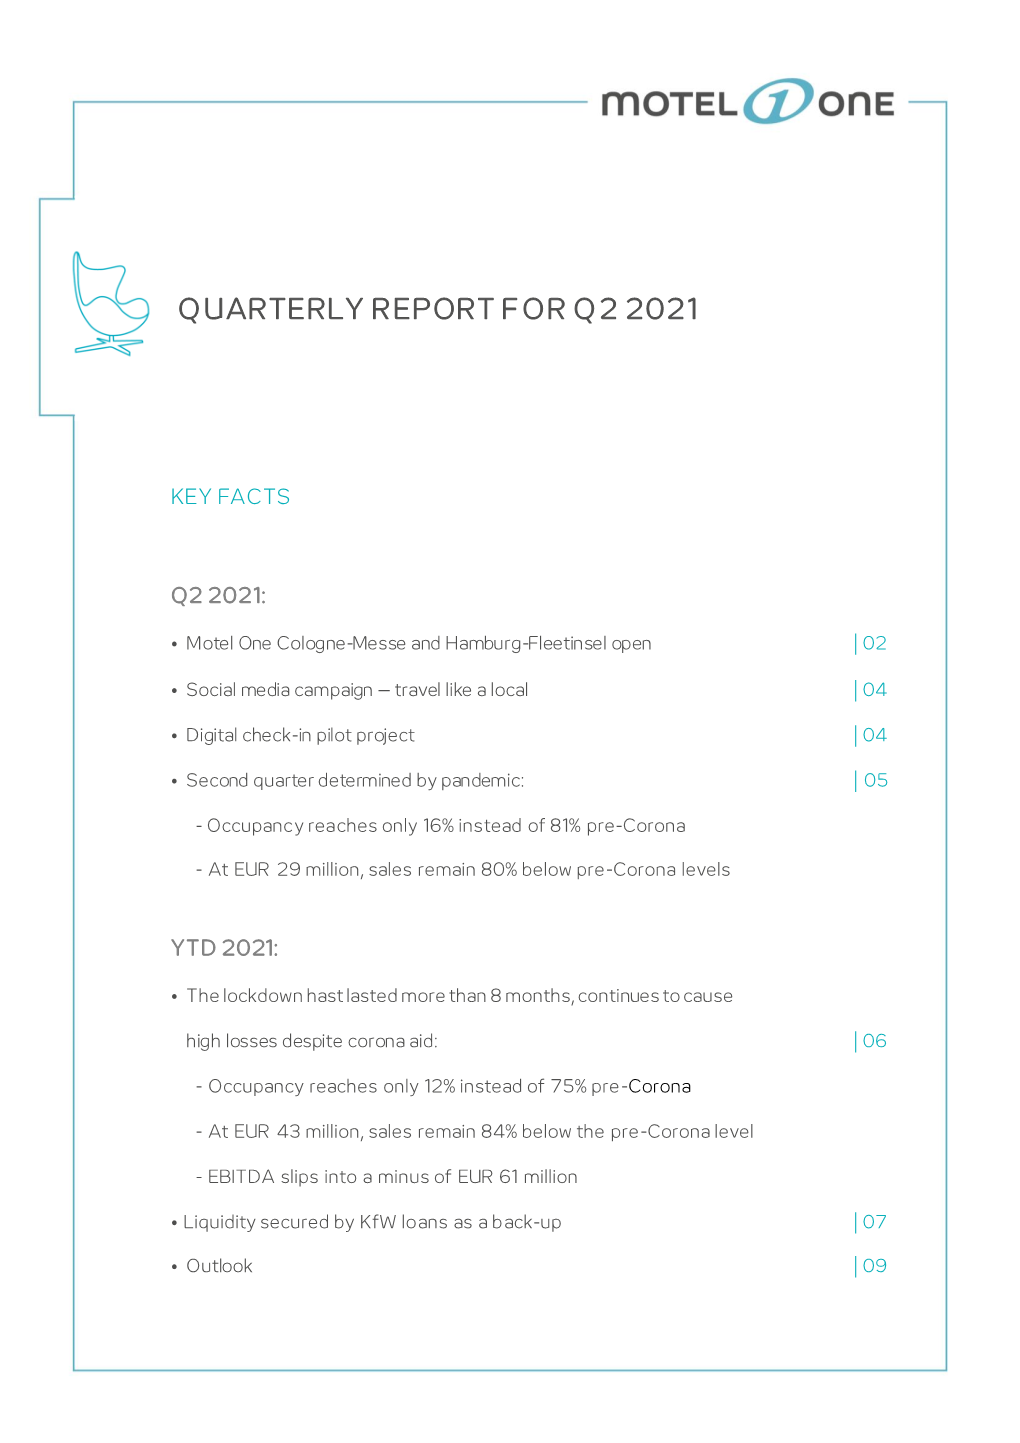 QUARTERLY REPORT for Q2 2021 Quarterly Report for Q2 2021 I Motel One Group